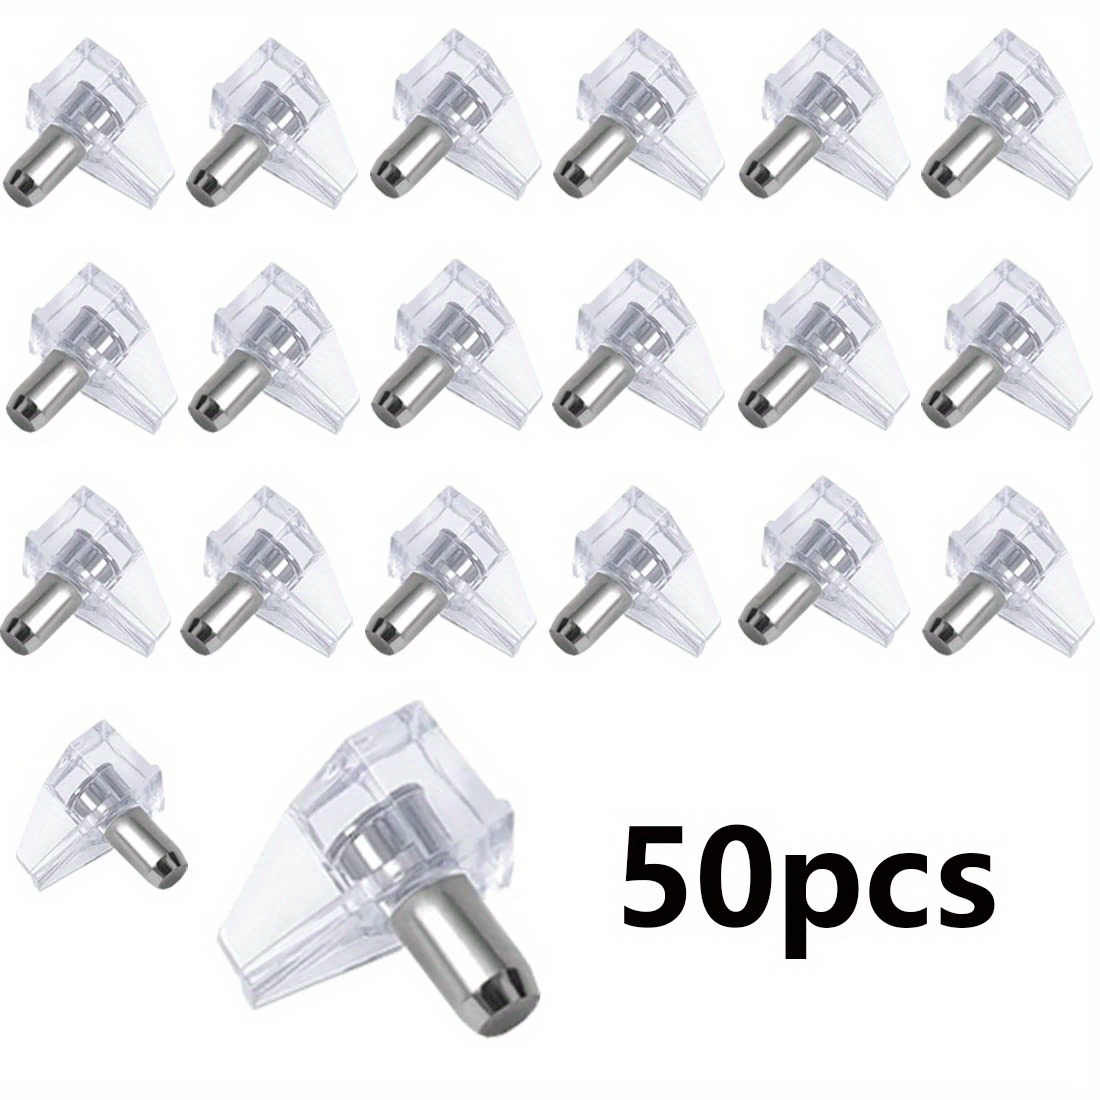 20pcs Cabinet Shelf Pegs, 5mm / 0.2in Shelf Bracket Pegs Metal Cabinet  Shelf Pins Support L-Shaped Furniture Hole Pins for Shelves Kitchen Cabinet